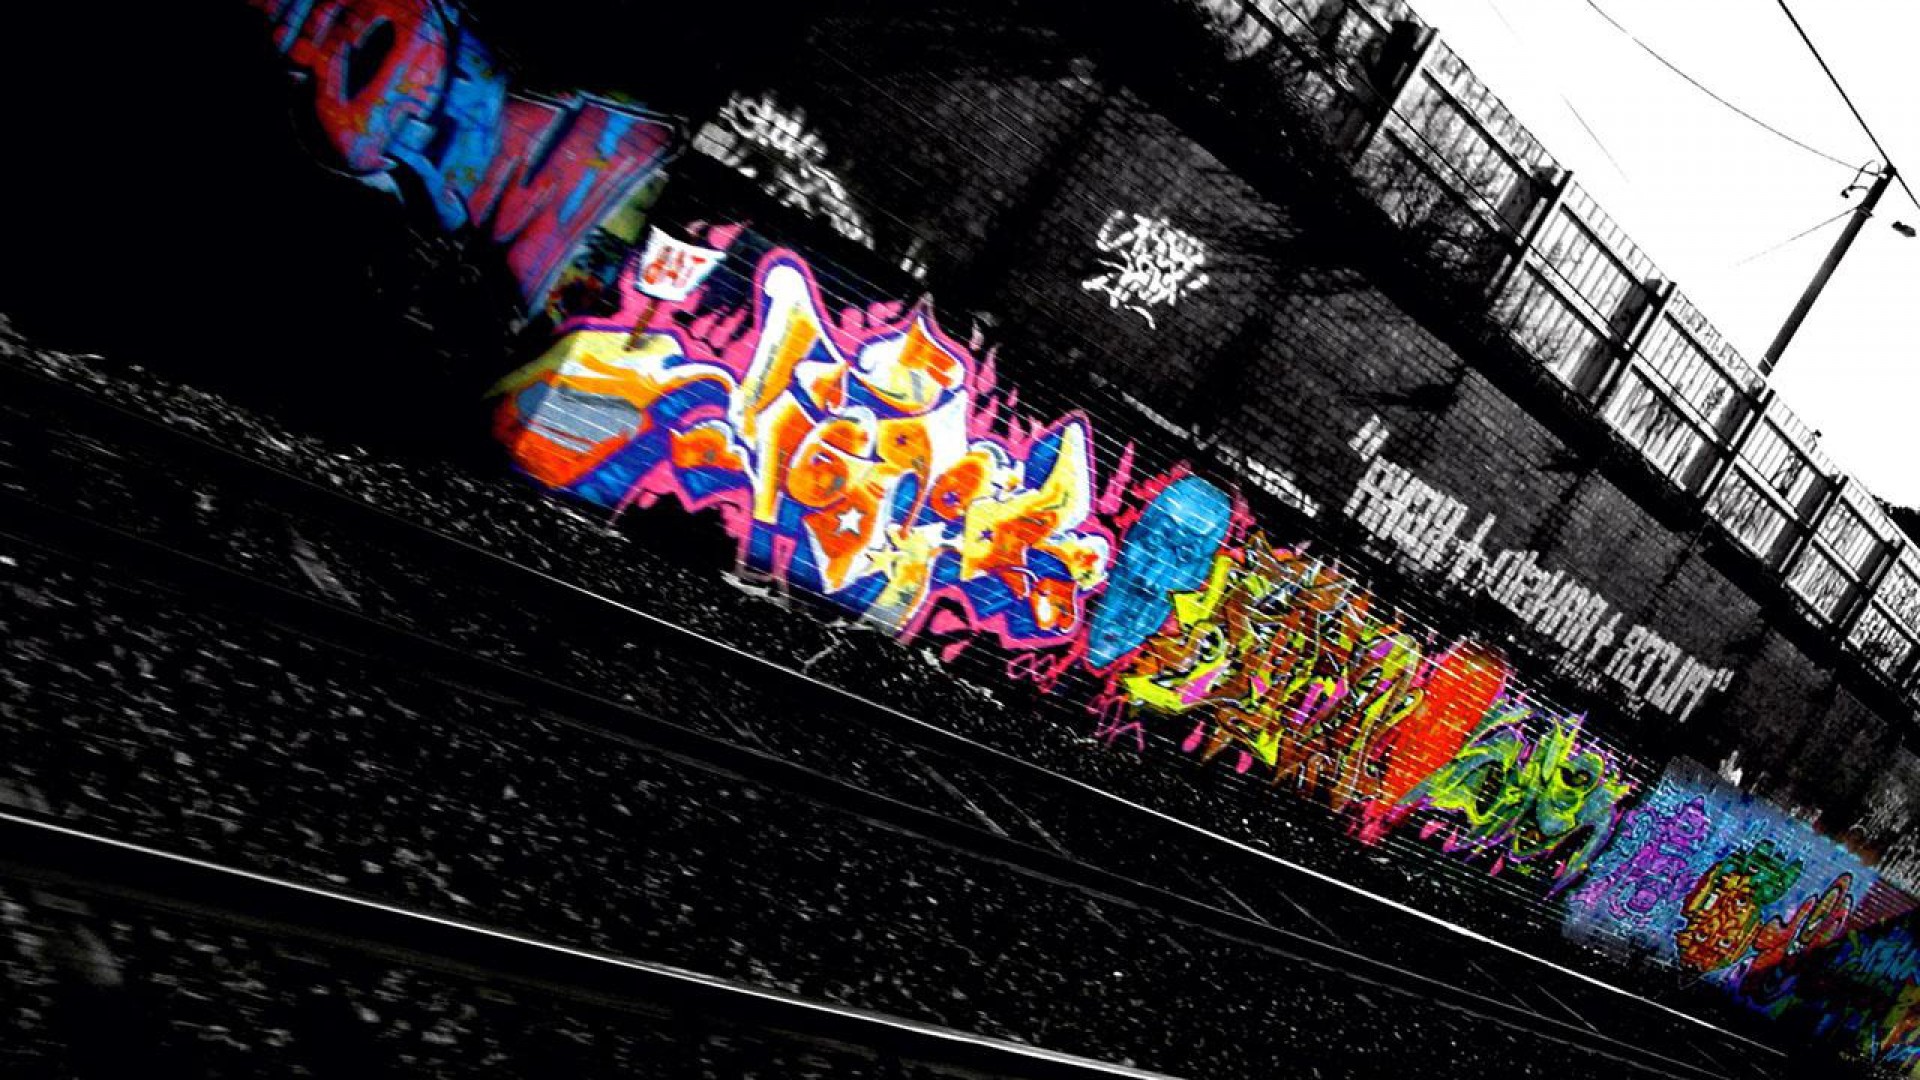 Wallpaper HD Graffiti Art with image resolution 1920x1080 pixel. You can make this wallpaper for your Desktop Computer Backgrounds, Mac Wallpapers, Android Lock screen or iPhone Screensavers